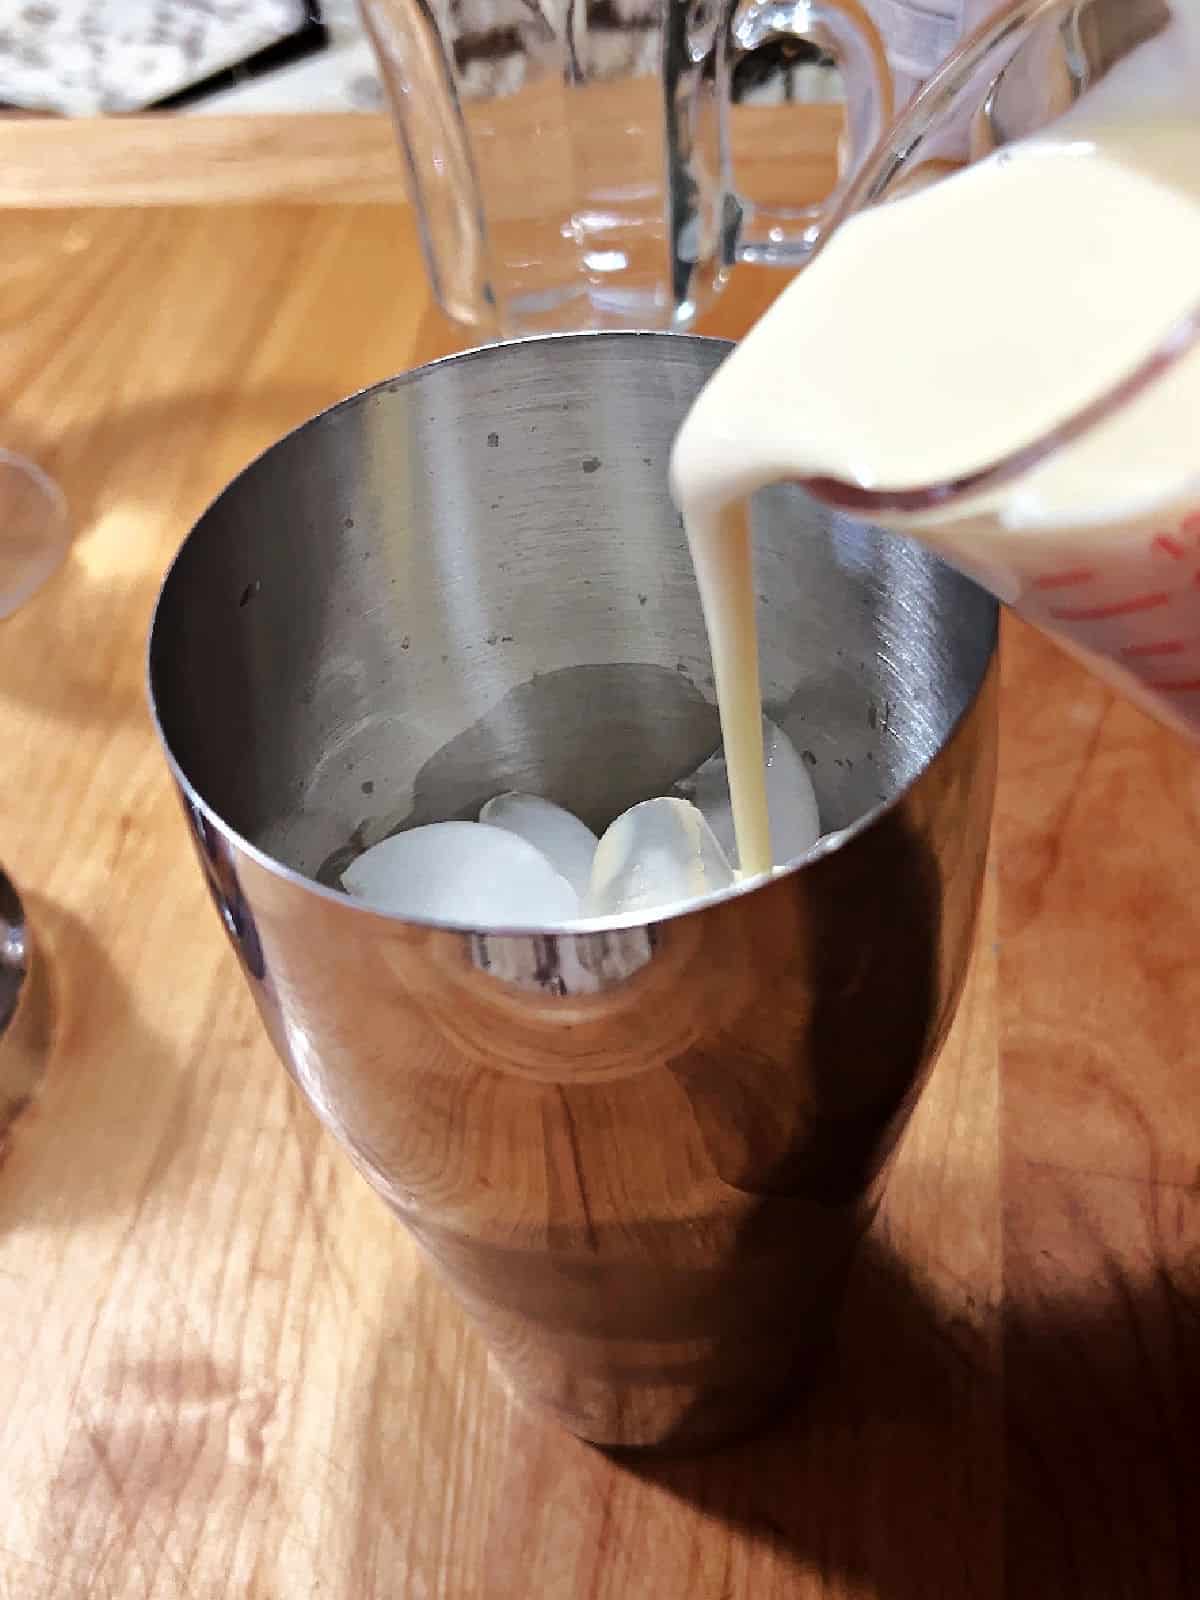 Adding ingredients to cocktail shaker filled with ice.